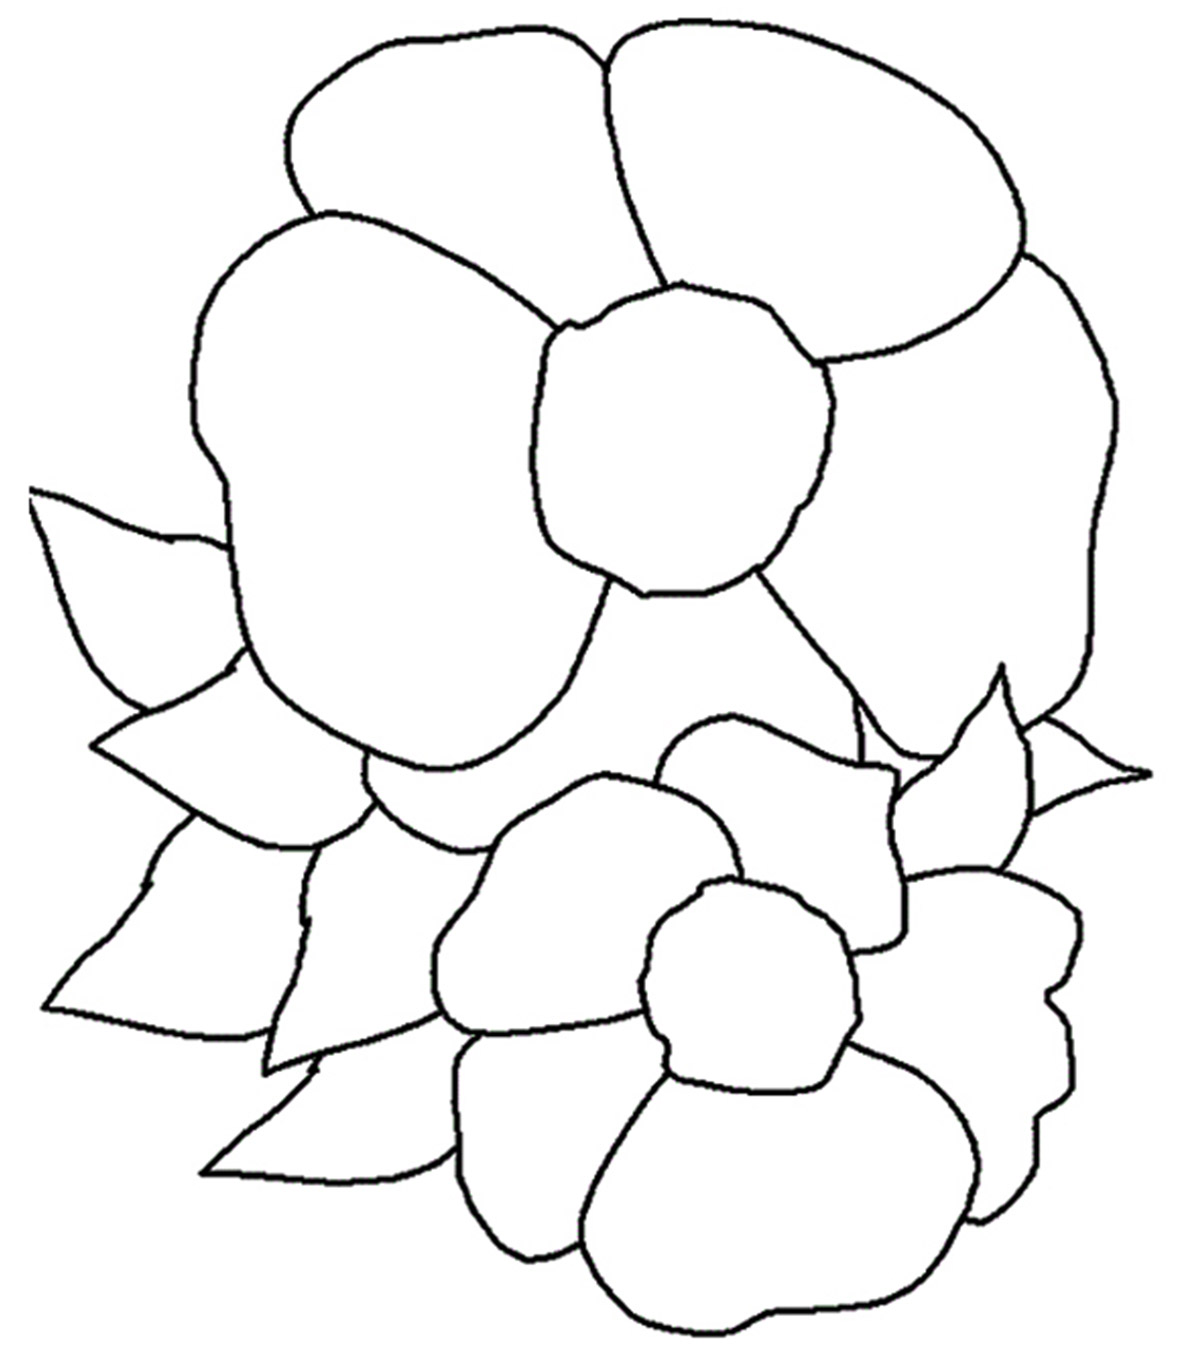 rose outlines for coloring